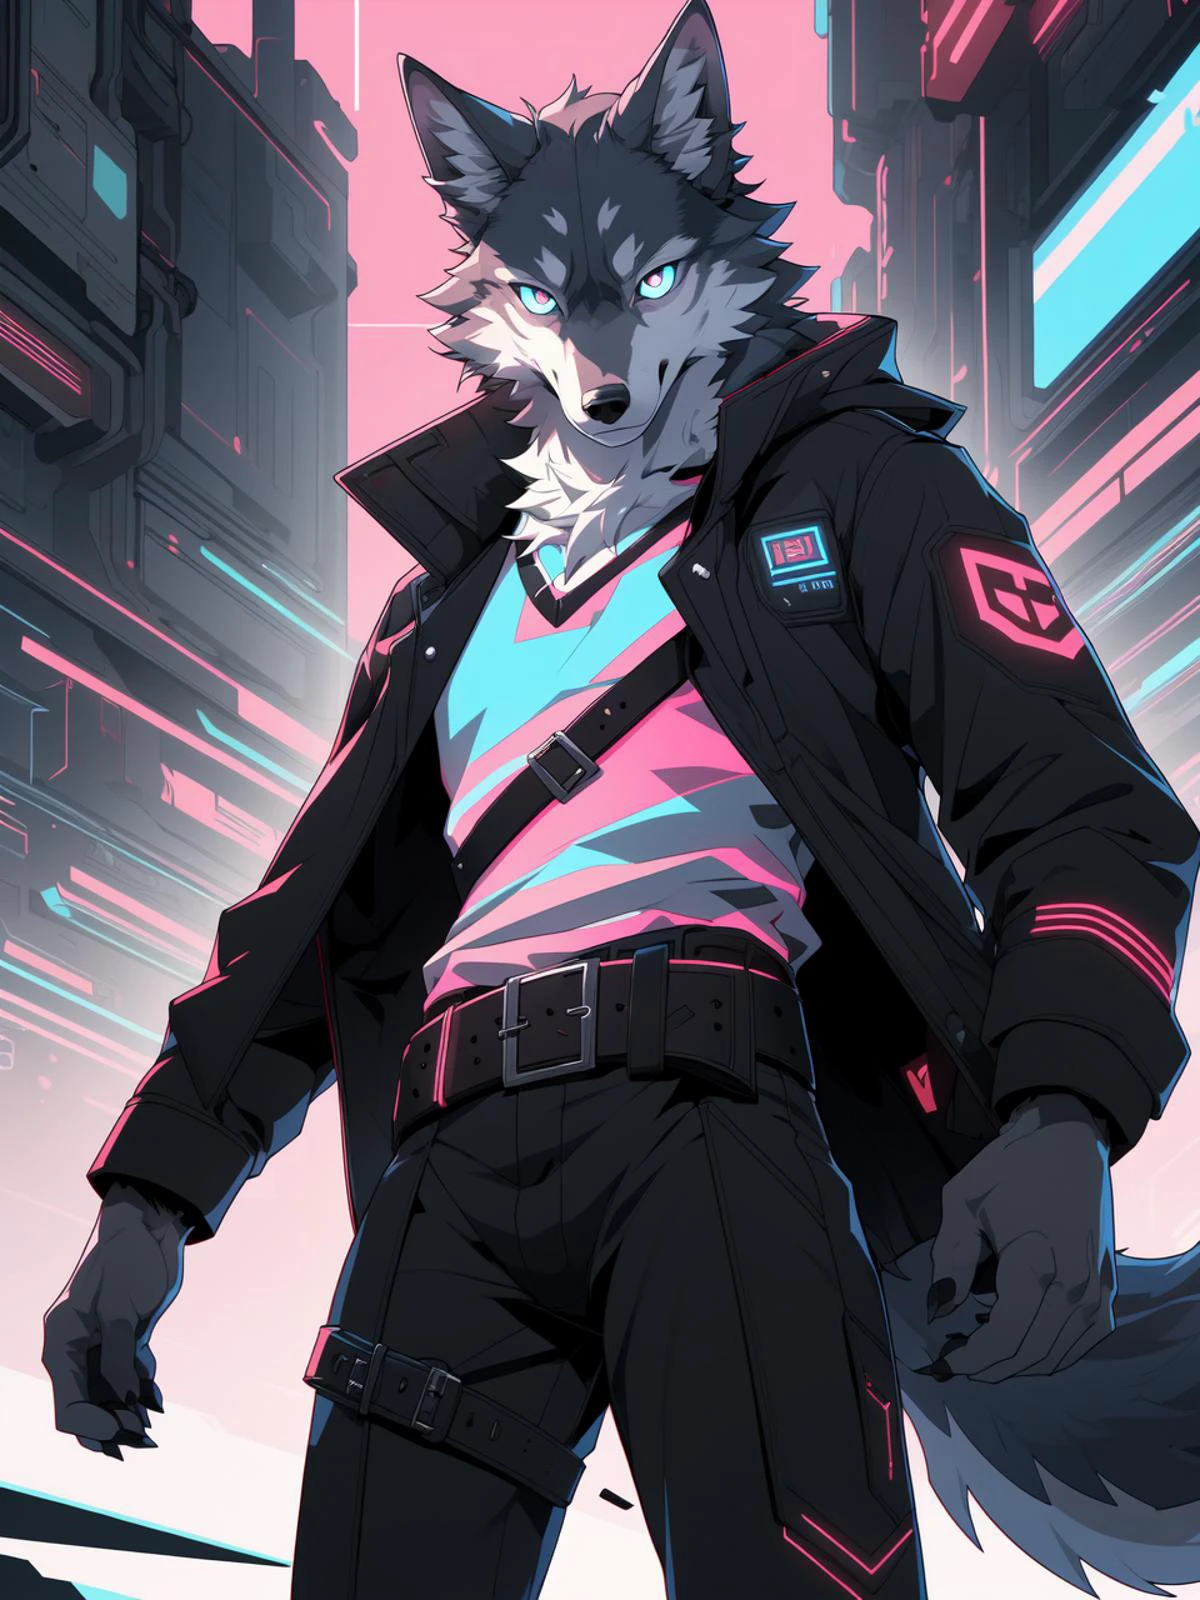 masterpiece, game poster, anime, 2d, illustration, digital media,
musuclar male, solo, wolf, canid,
cyberpunk, coat, black pants, belt,
glitch, bright eyes, detailed eyes,
green theme, pink theme, color contrast, 
dutch angle, standing, high-angle view